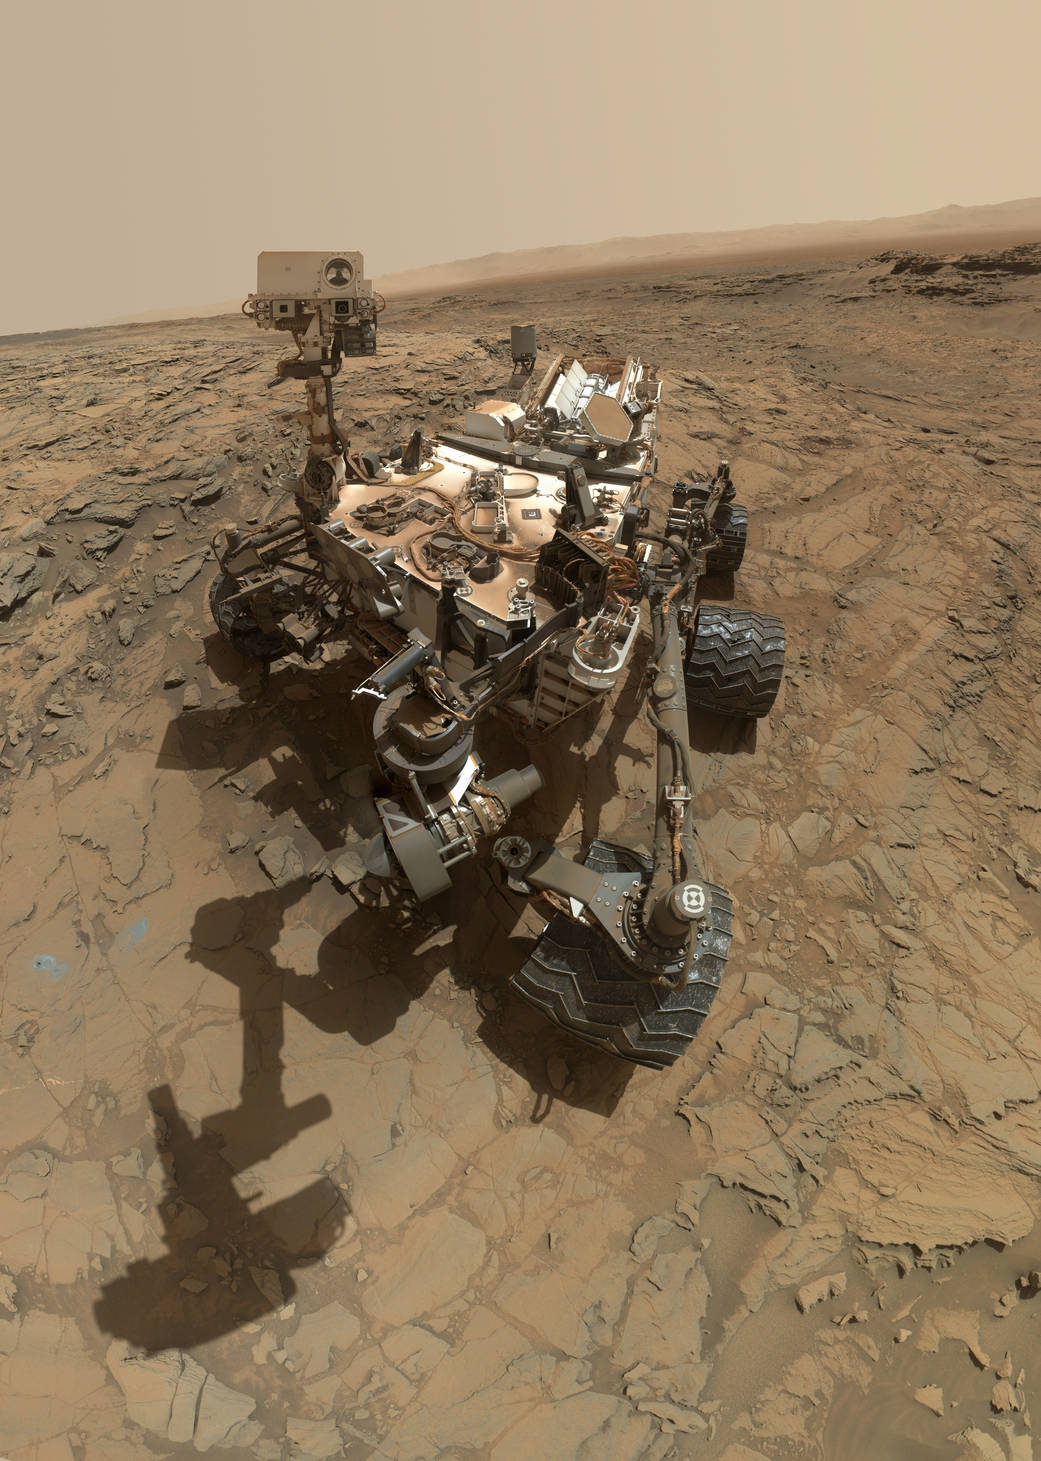 The Curiosity Mars rover’s wheels are starting to break